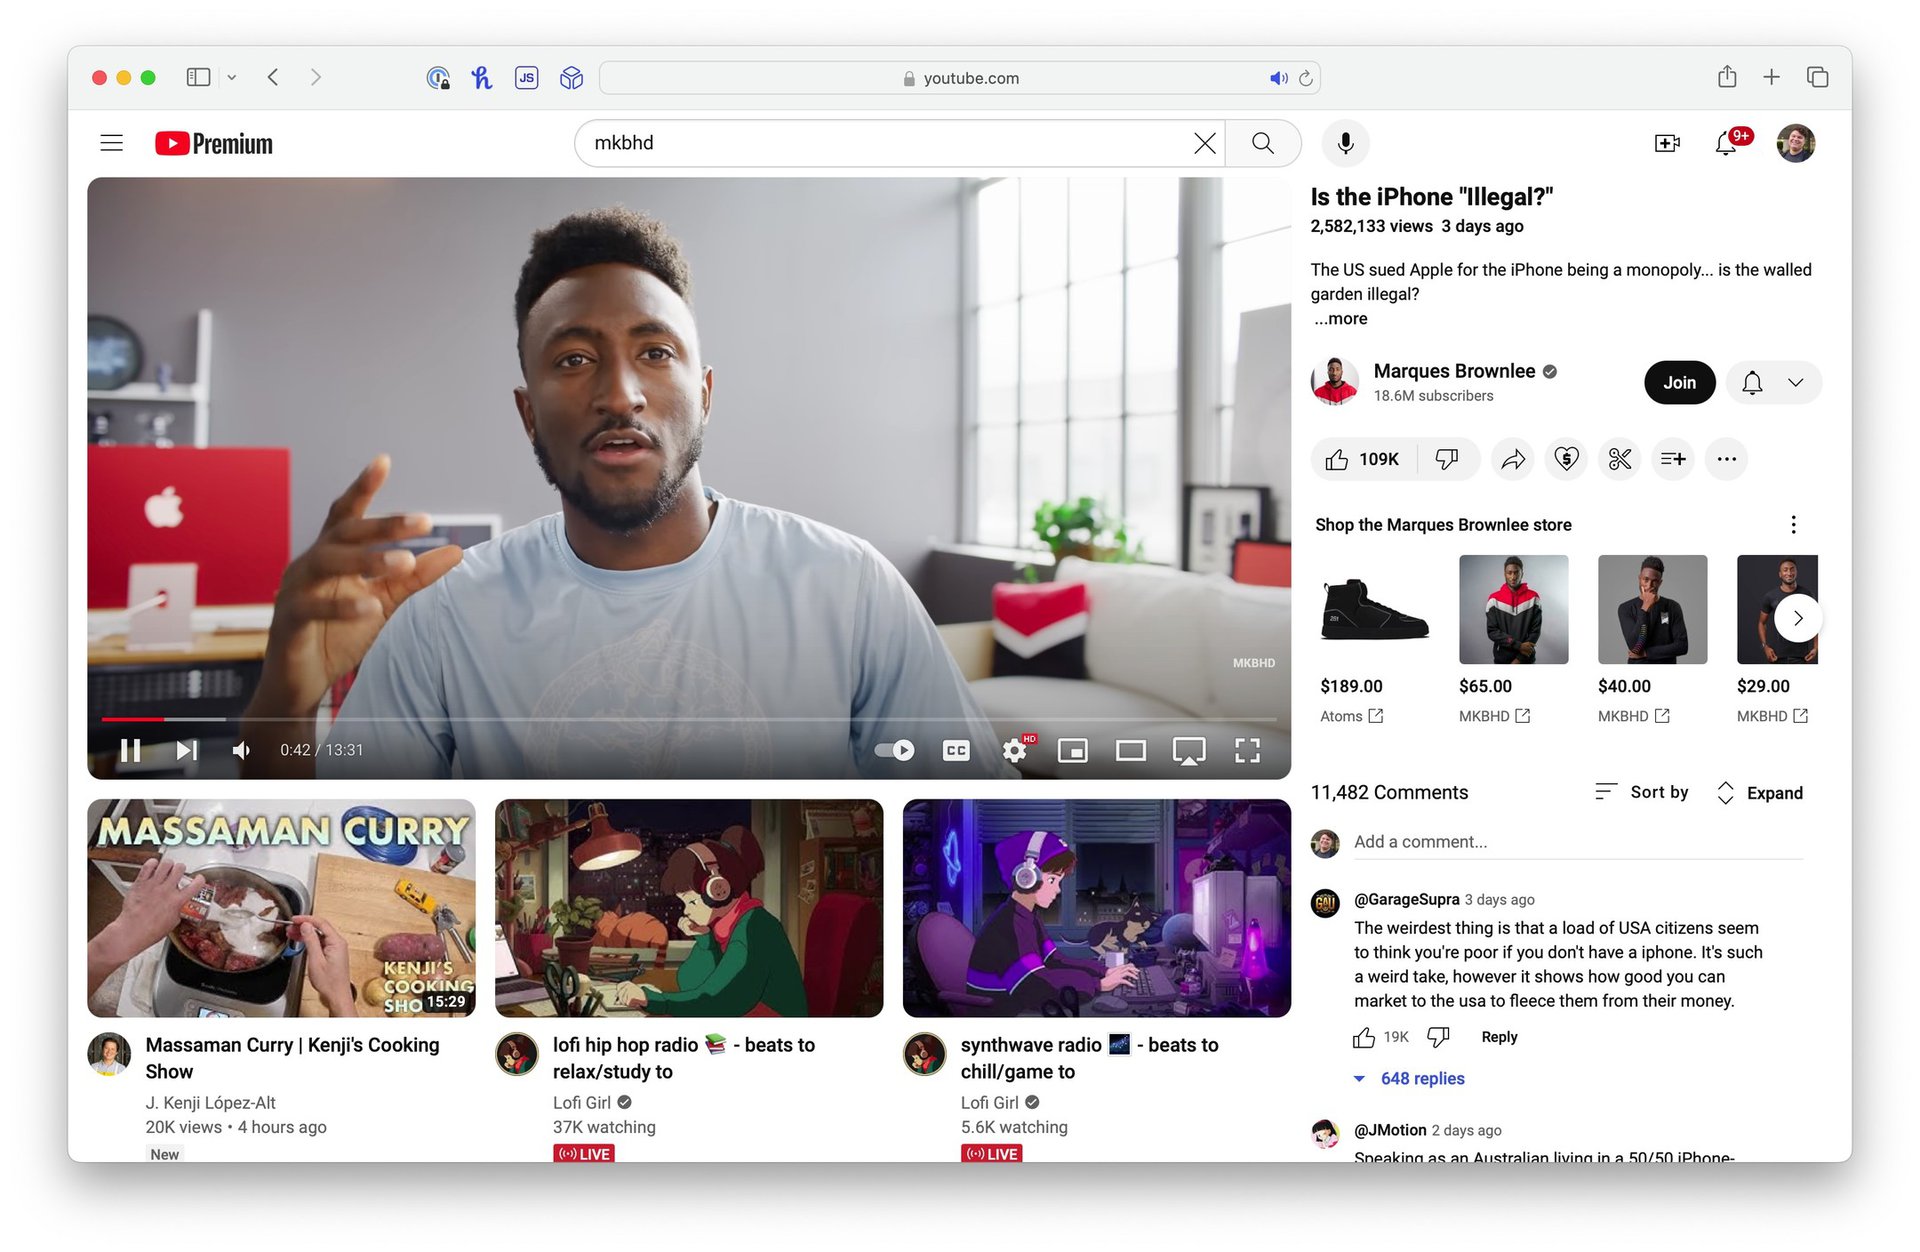 YouTube redesign